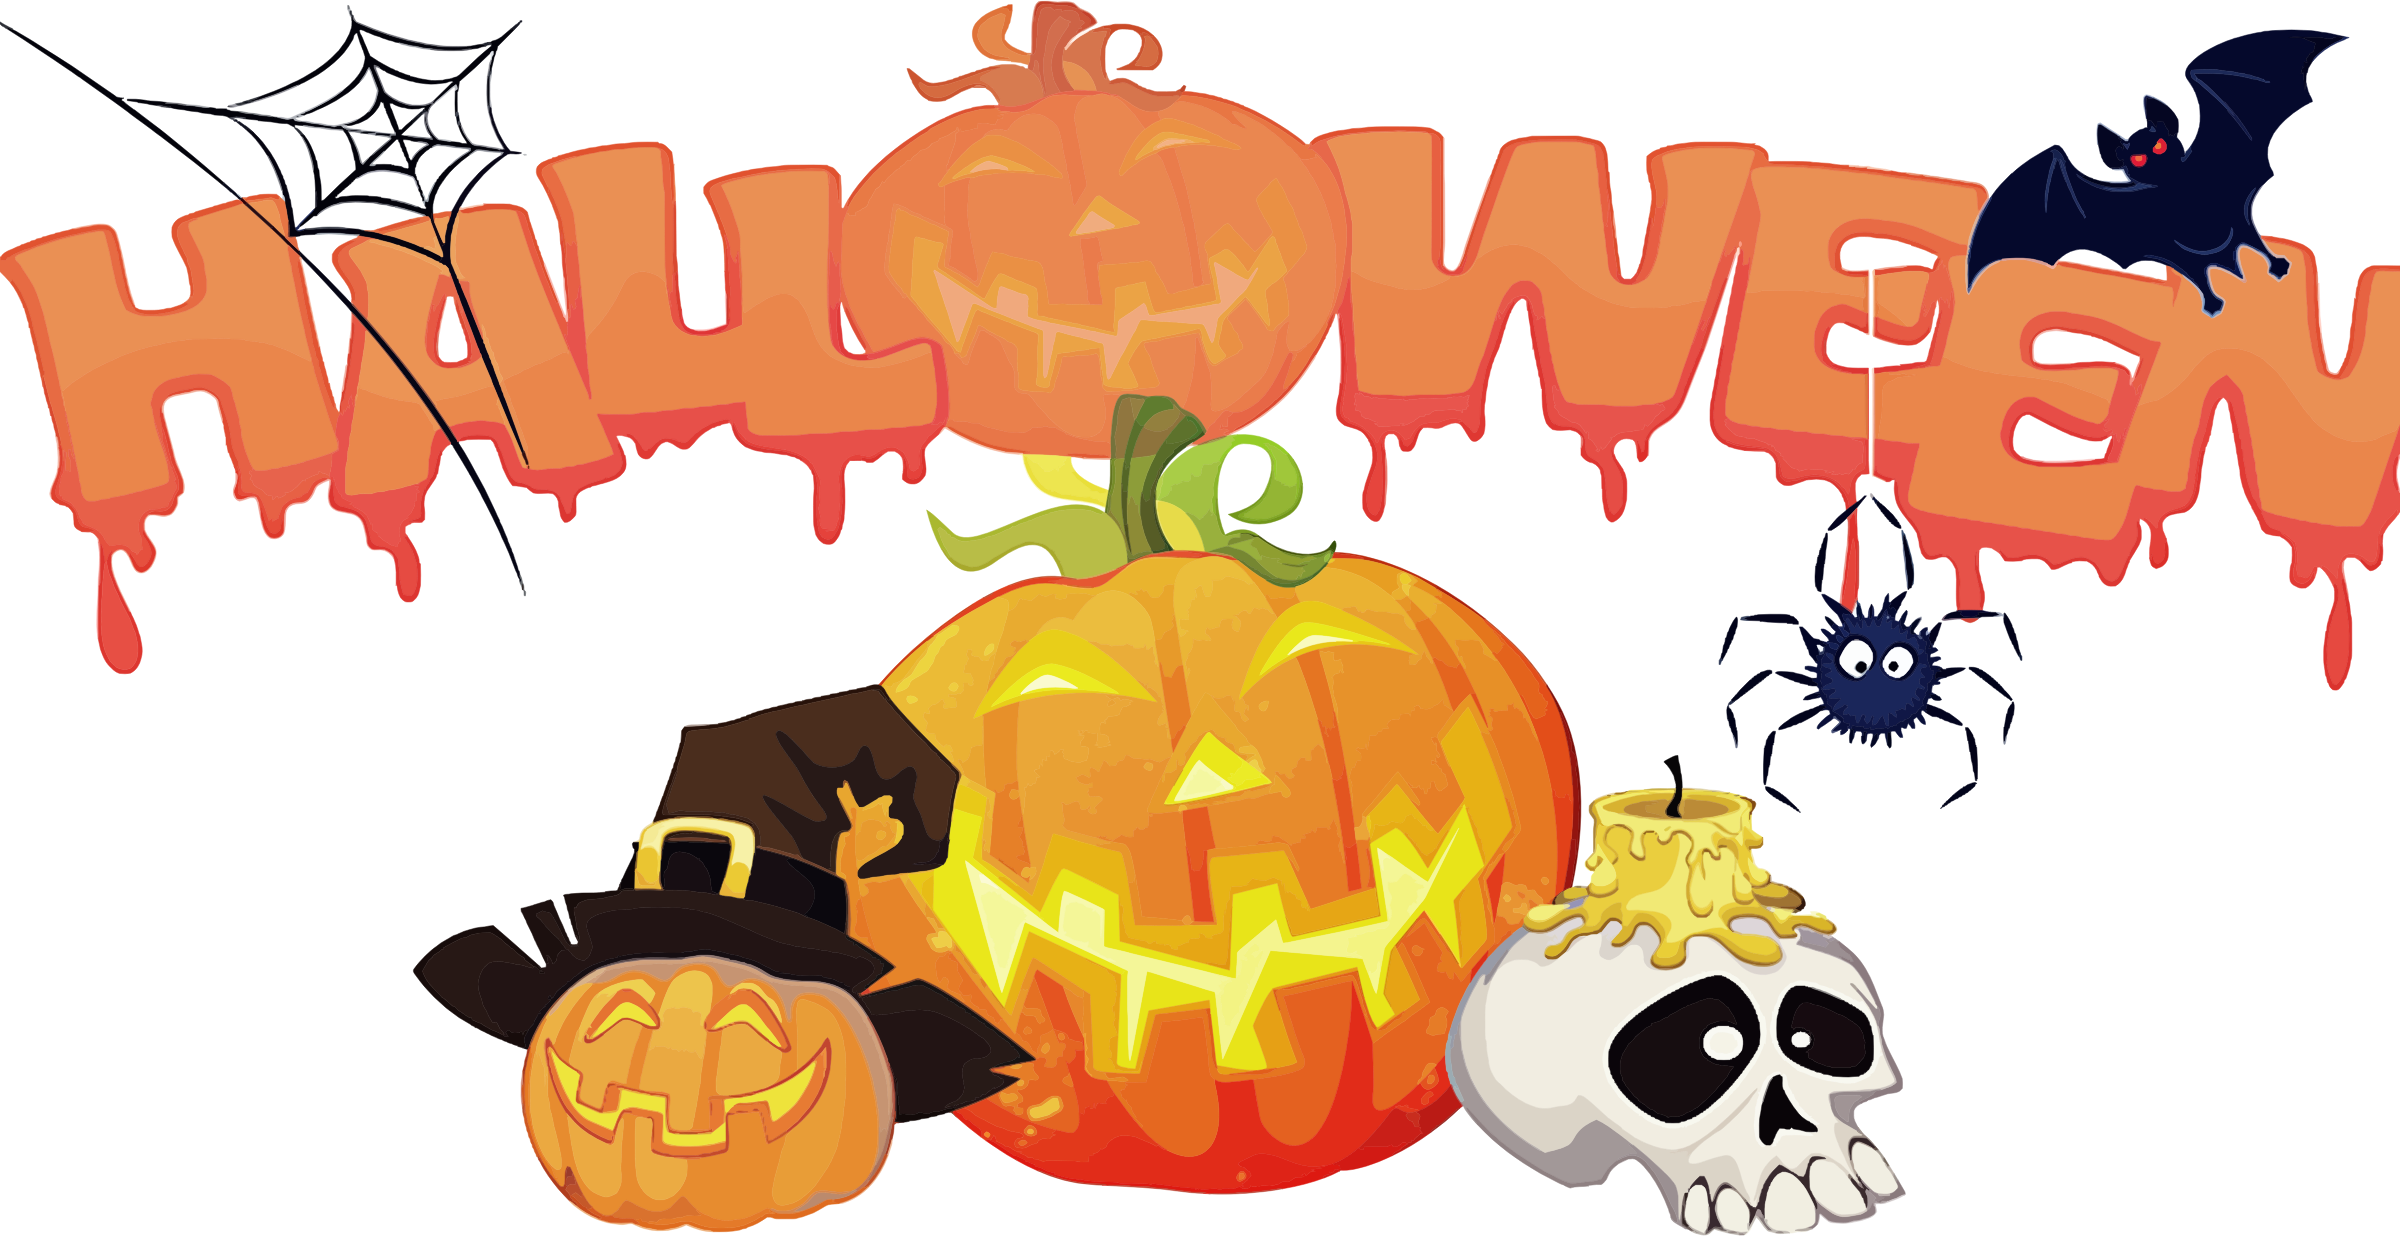 Scary clipart. Free download transparent .PNG